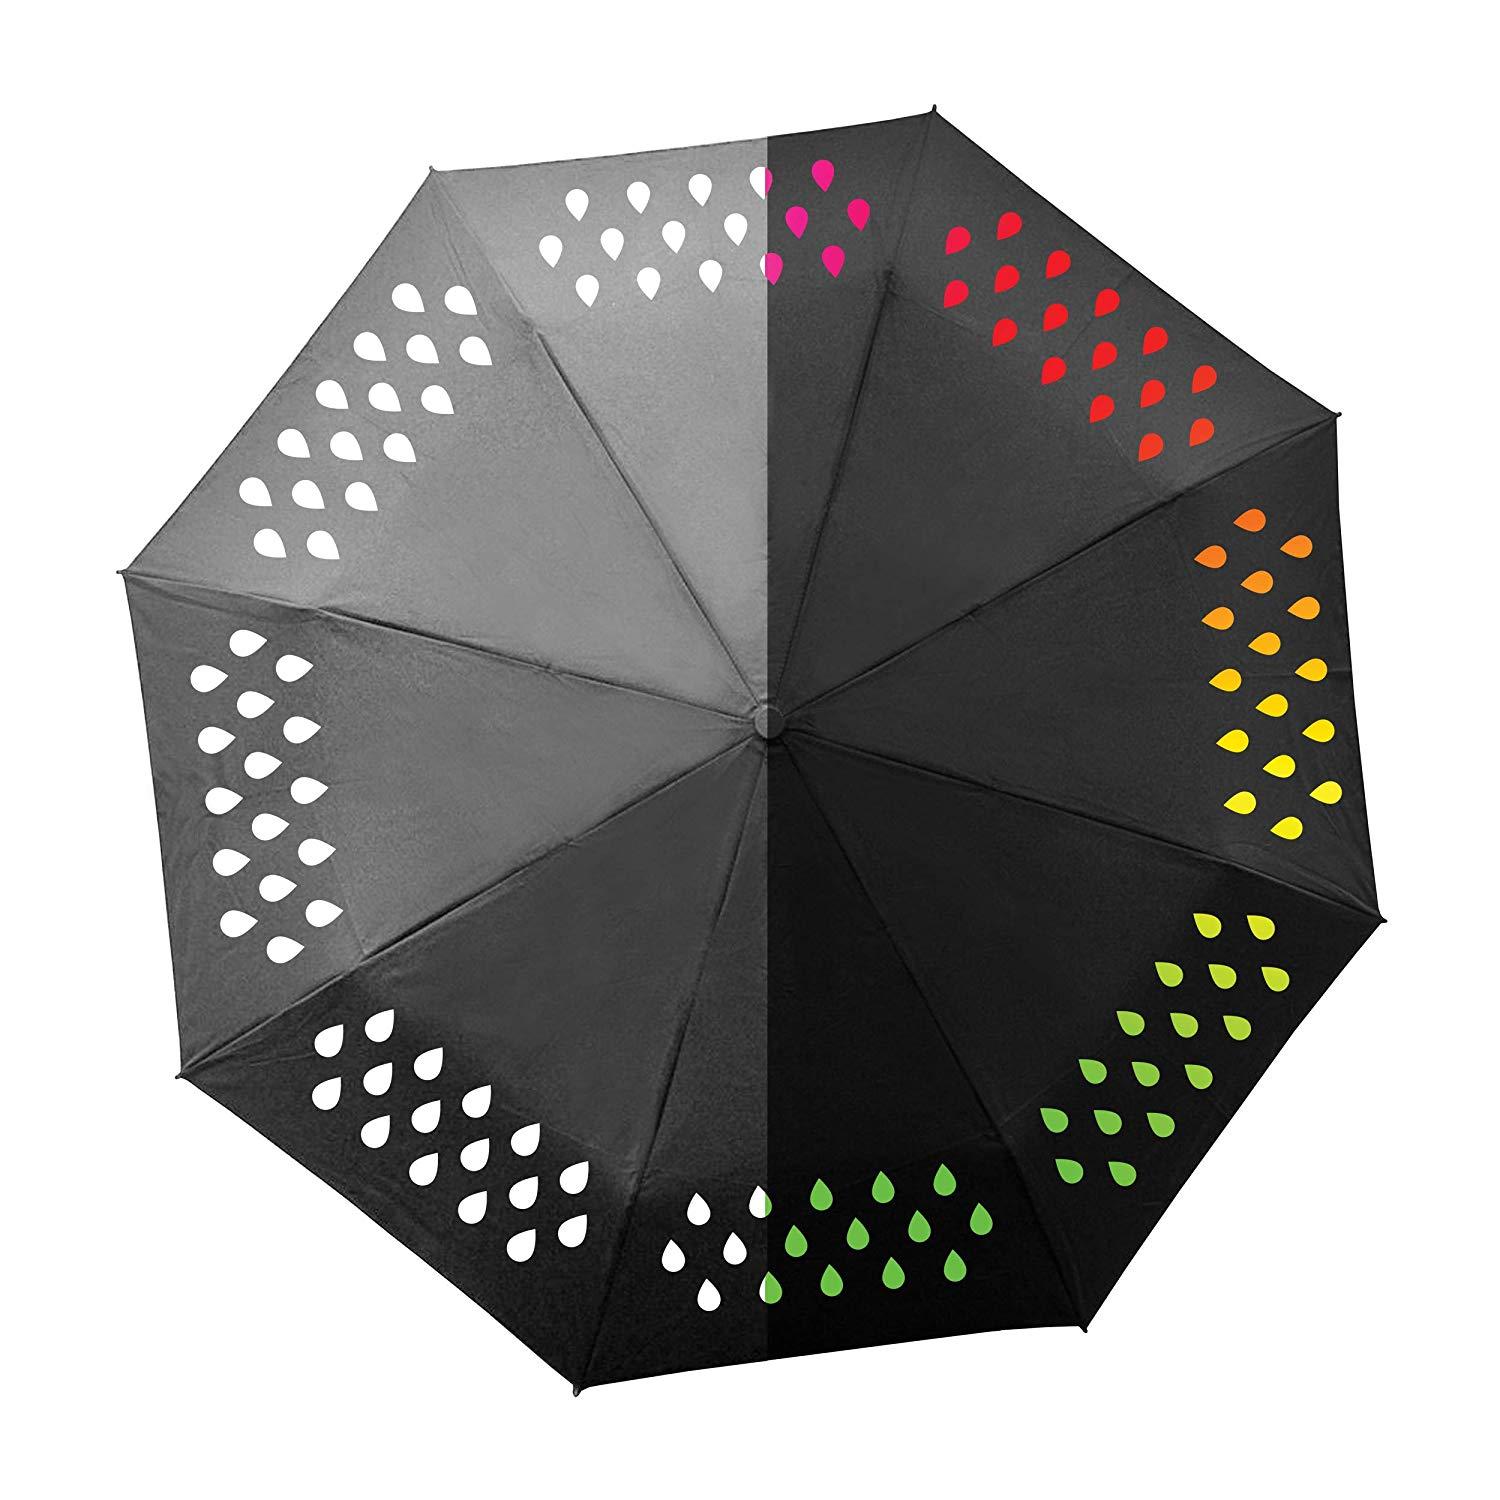 We have to admit there is no other umbrella quite as cool and unique as the Suck UK Colour Change Folding Travel Umbrella